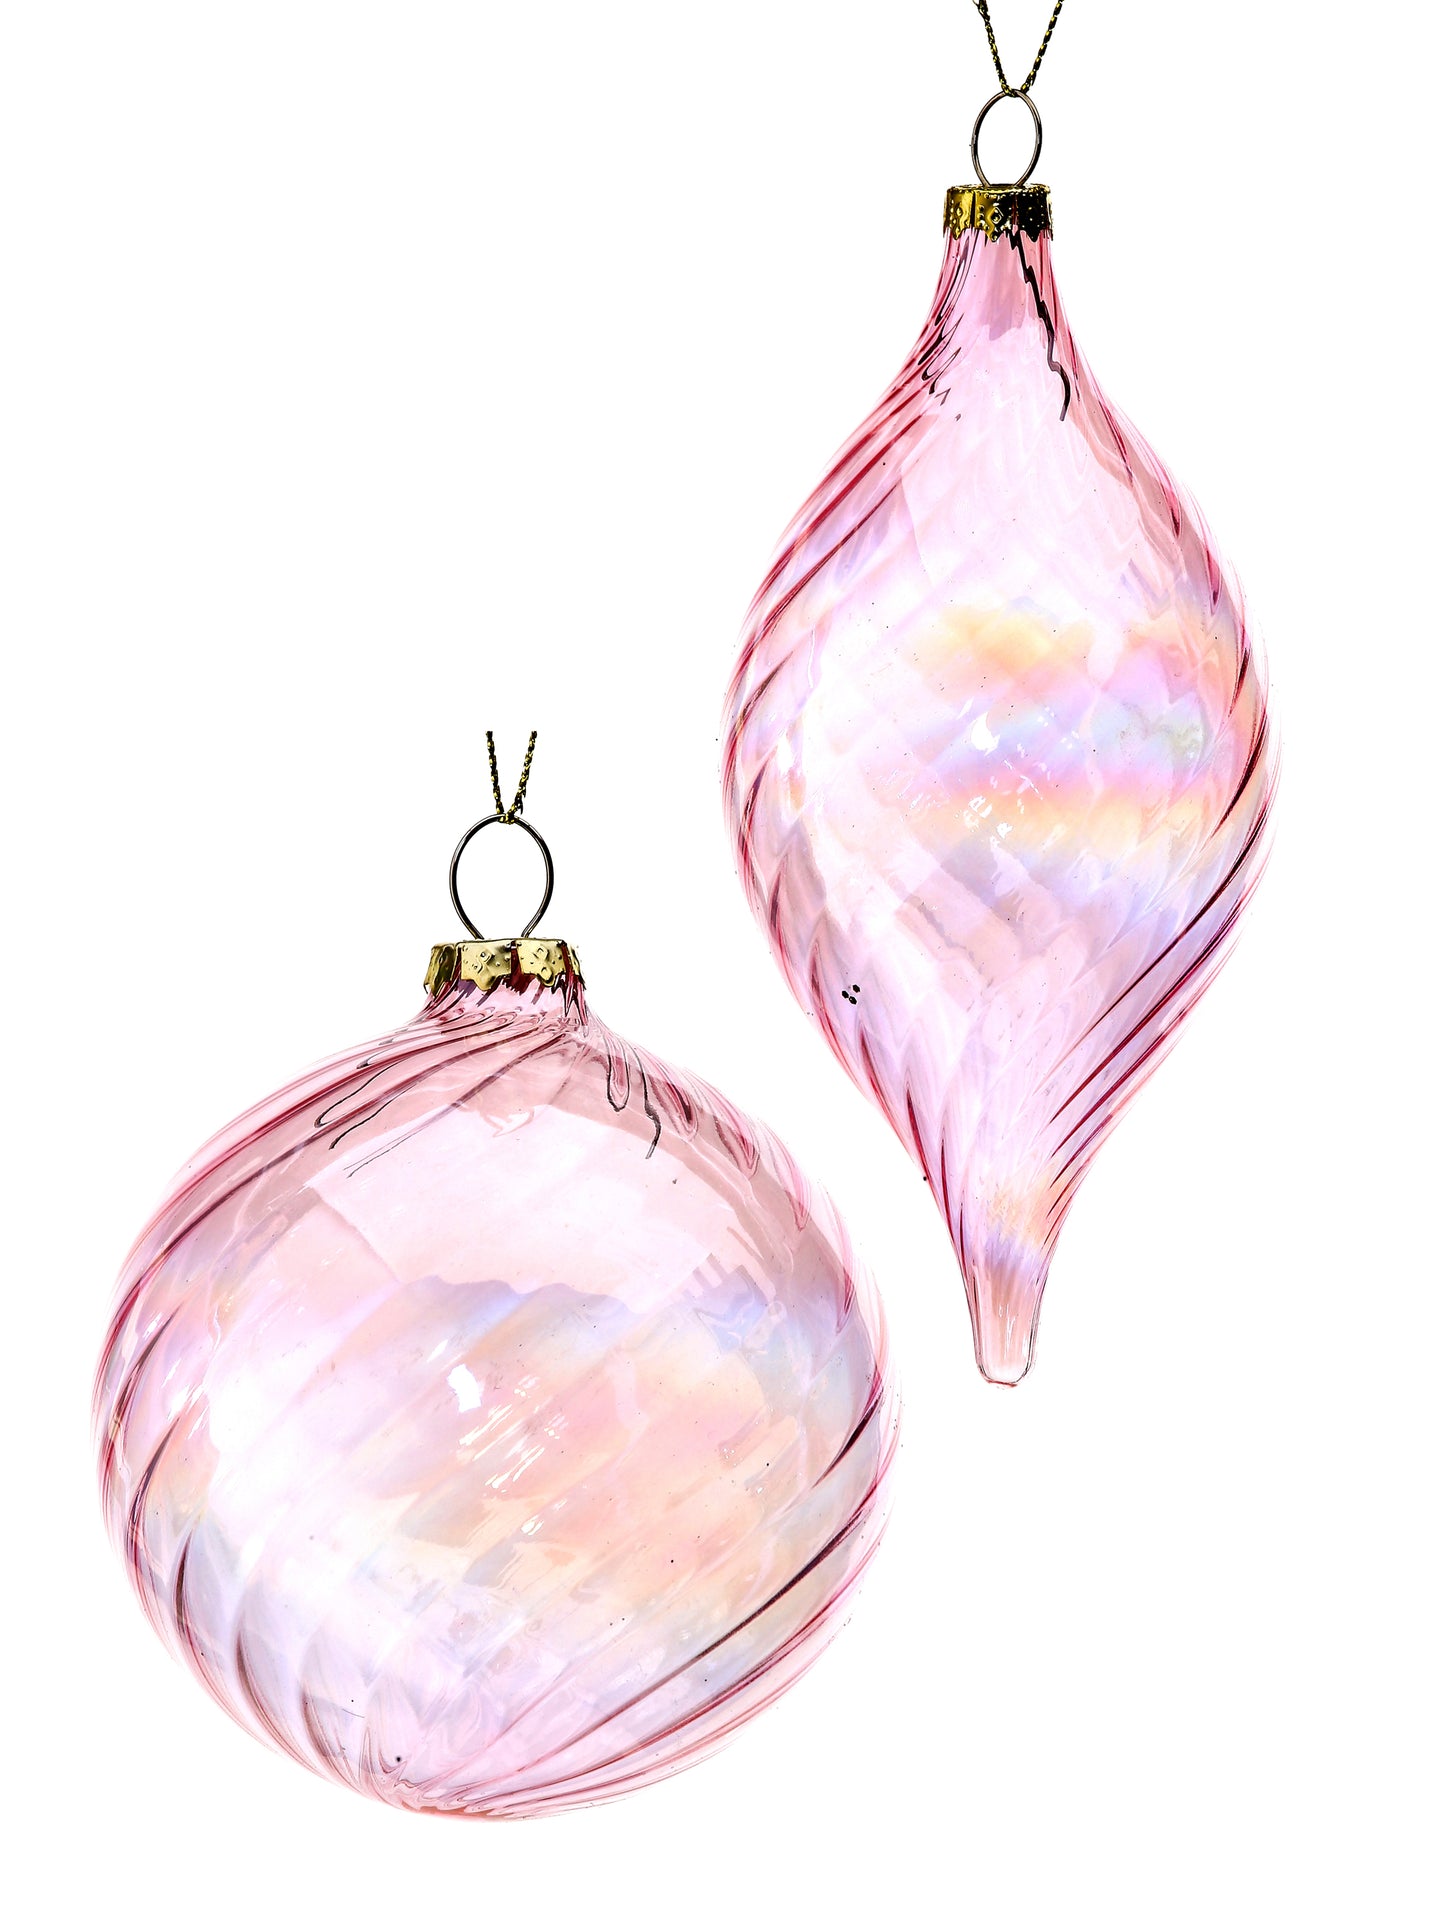 Pink Glass Swirl Ornaments: Ball or Finial